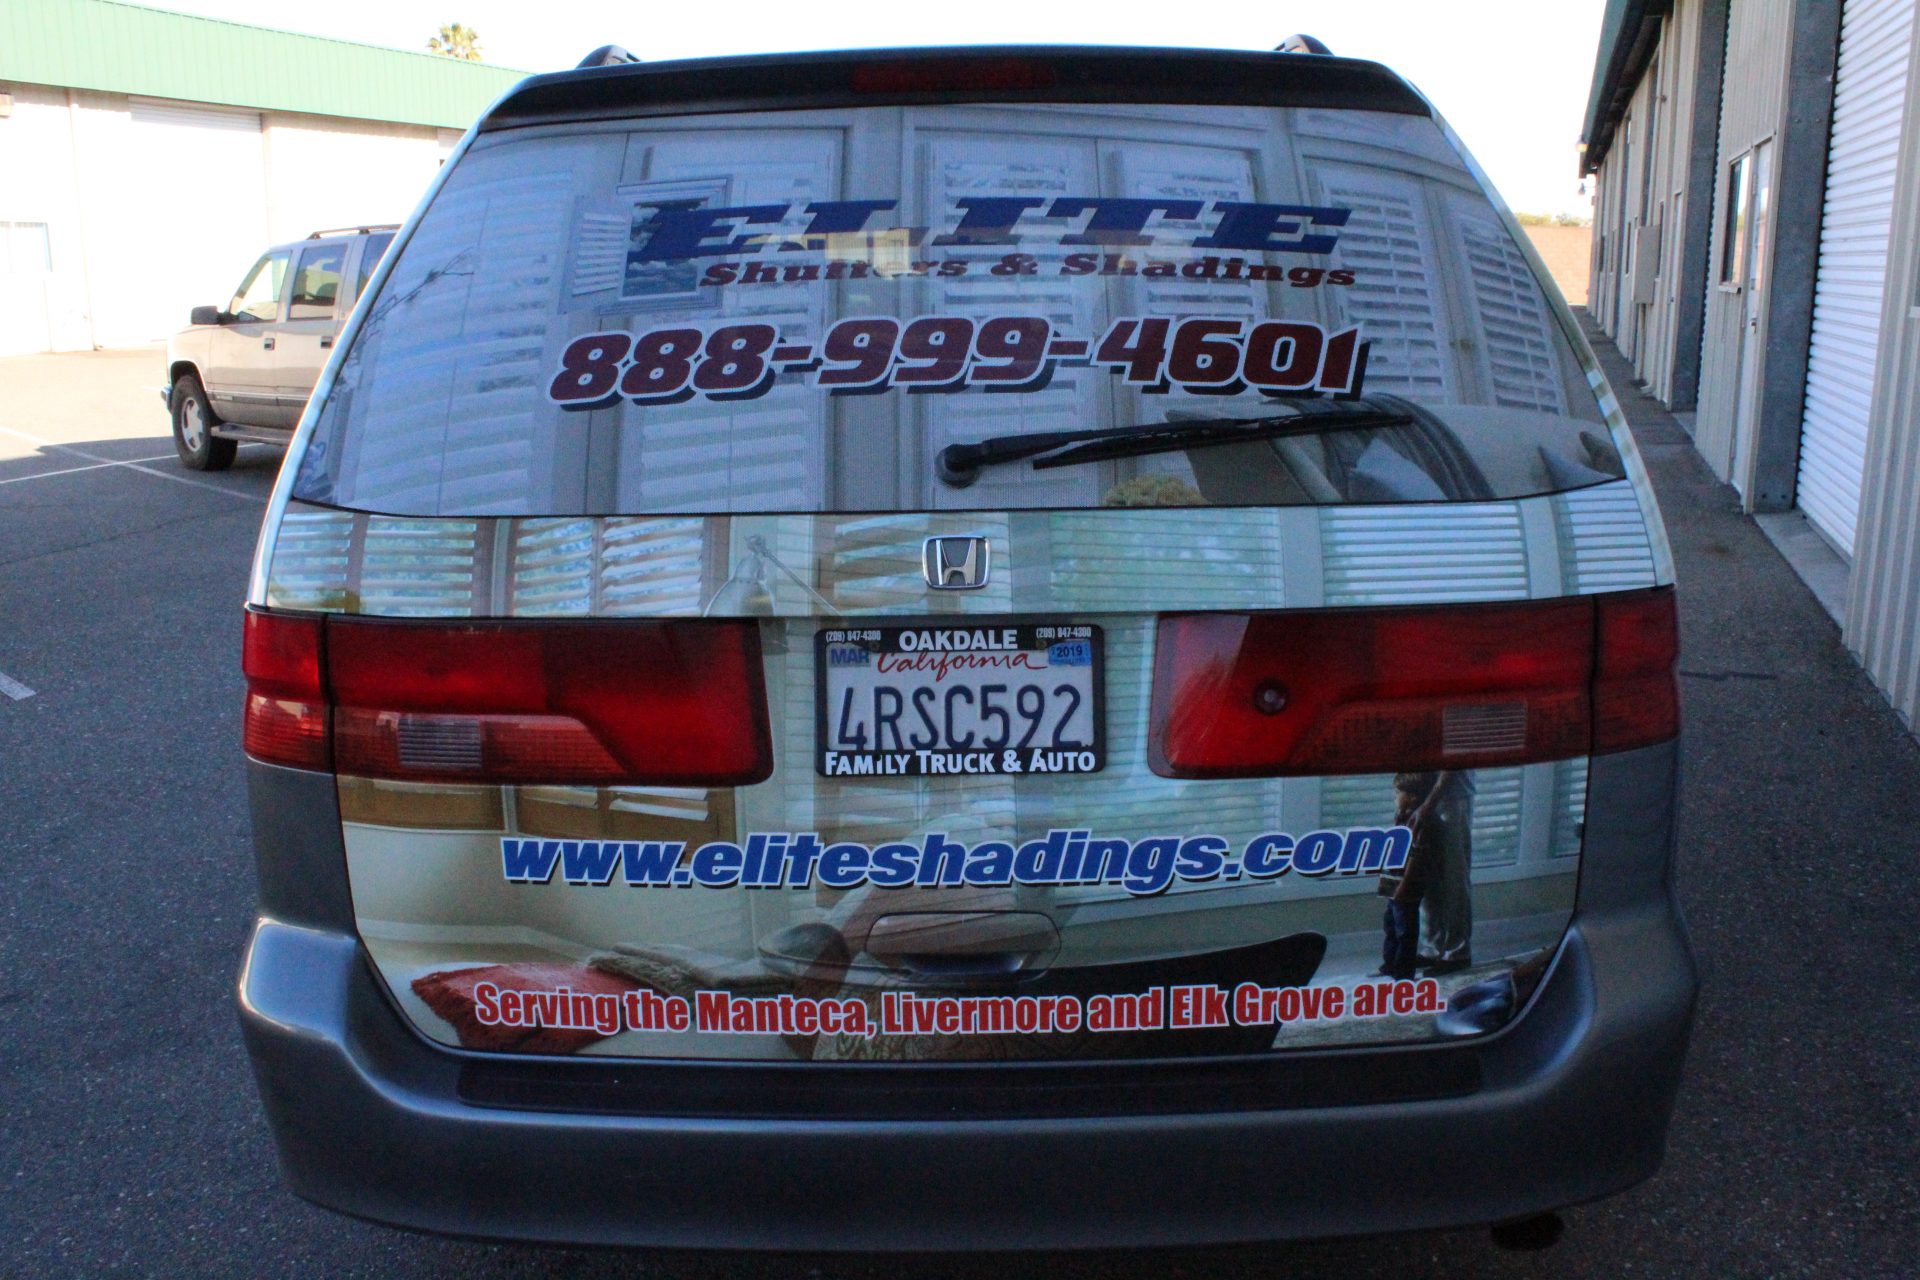 Vehicle Wrap for Elite Shutters & Shadings